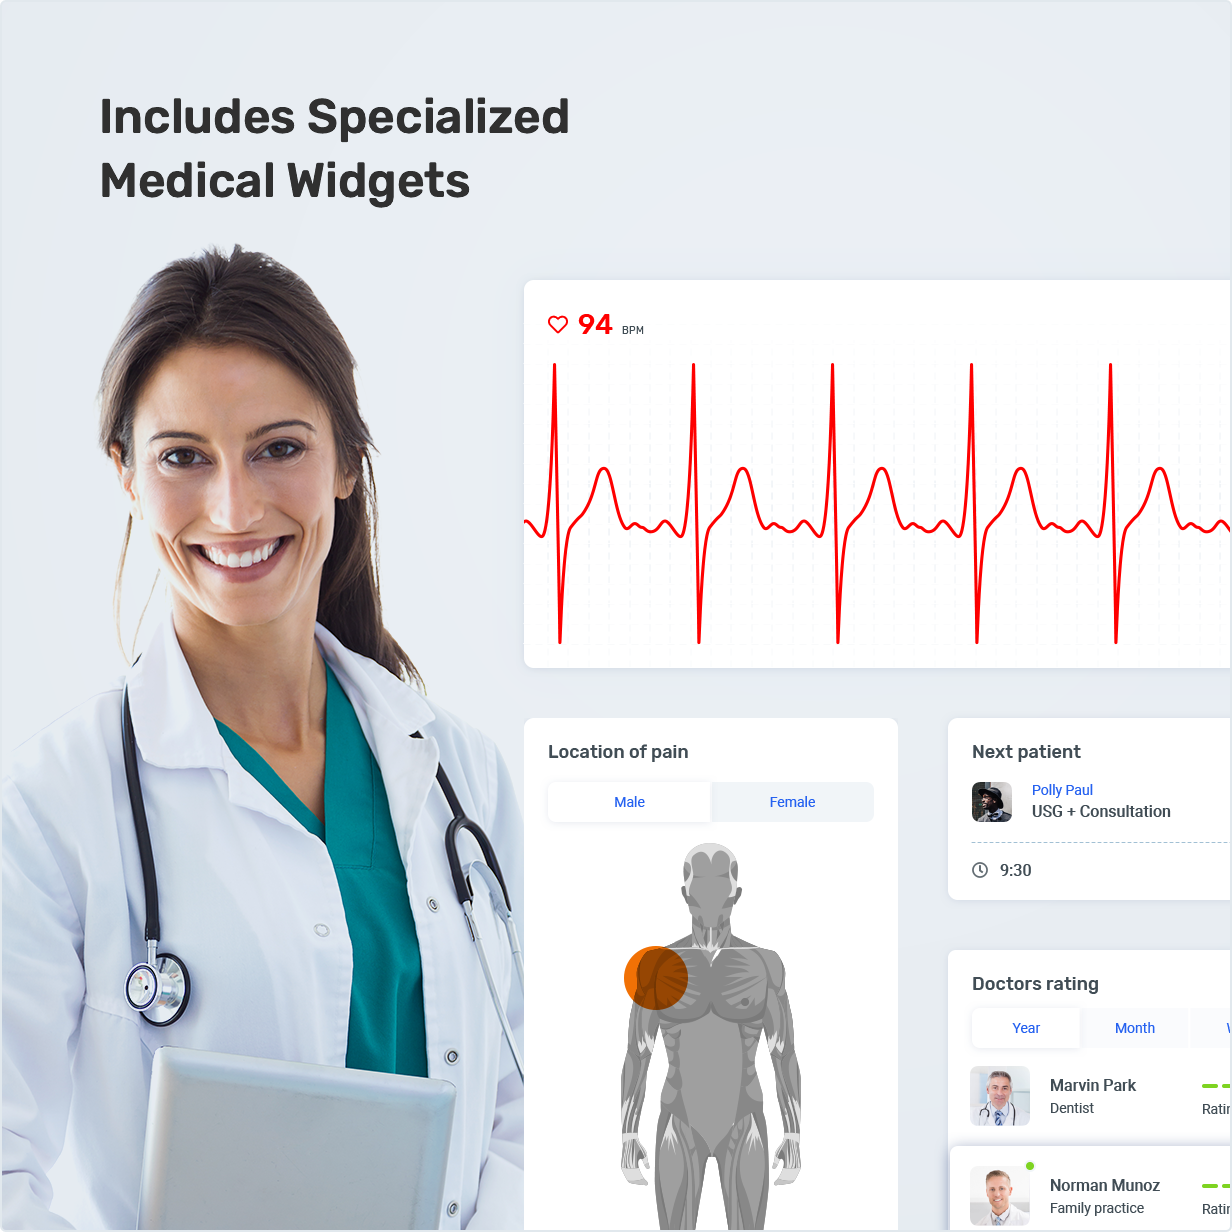 Includes Specialized Medical Widgets